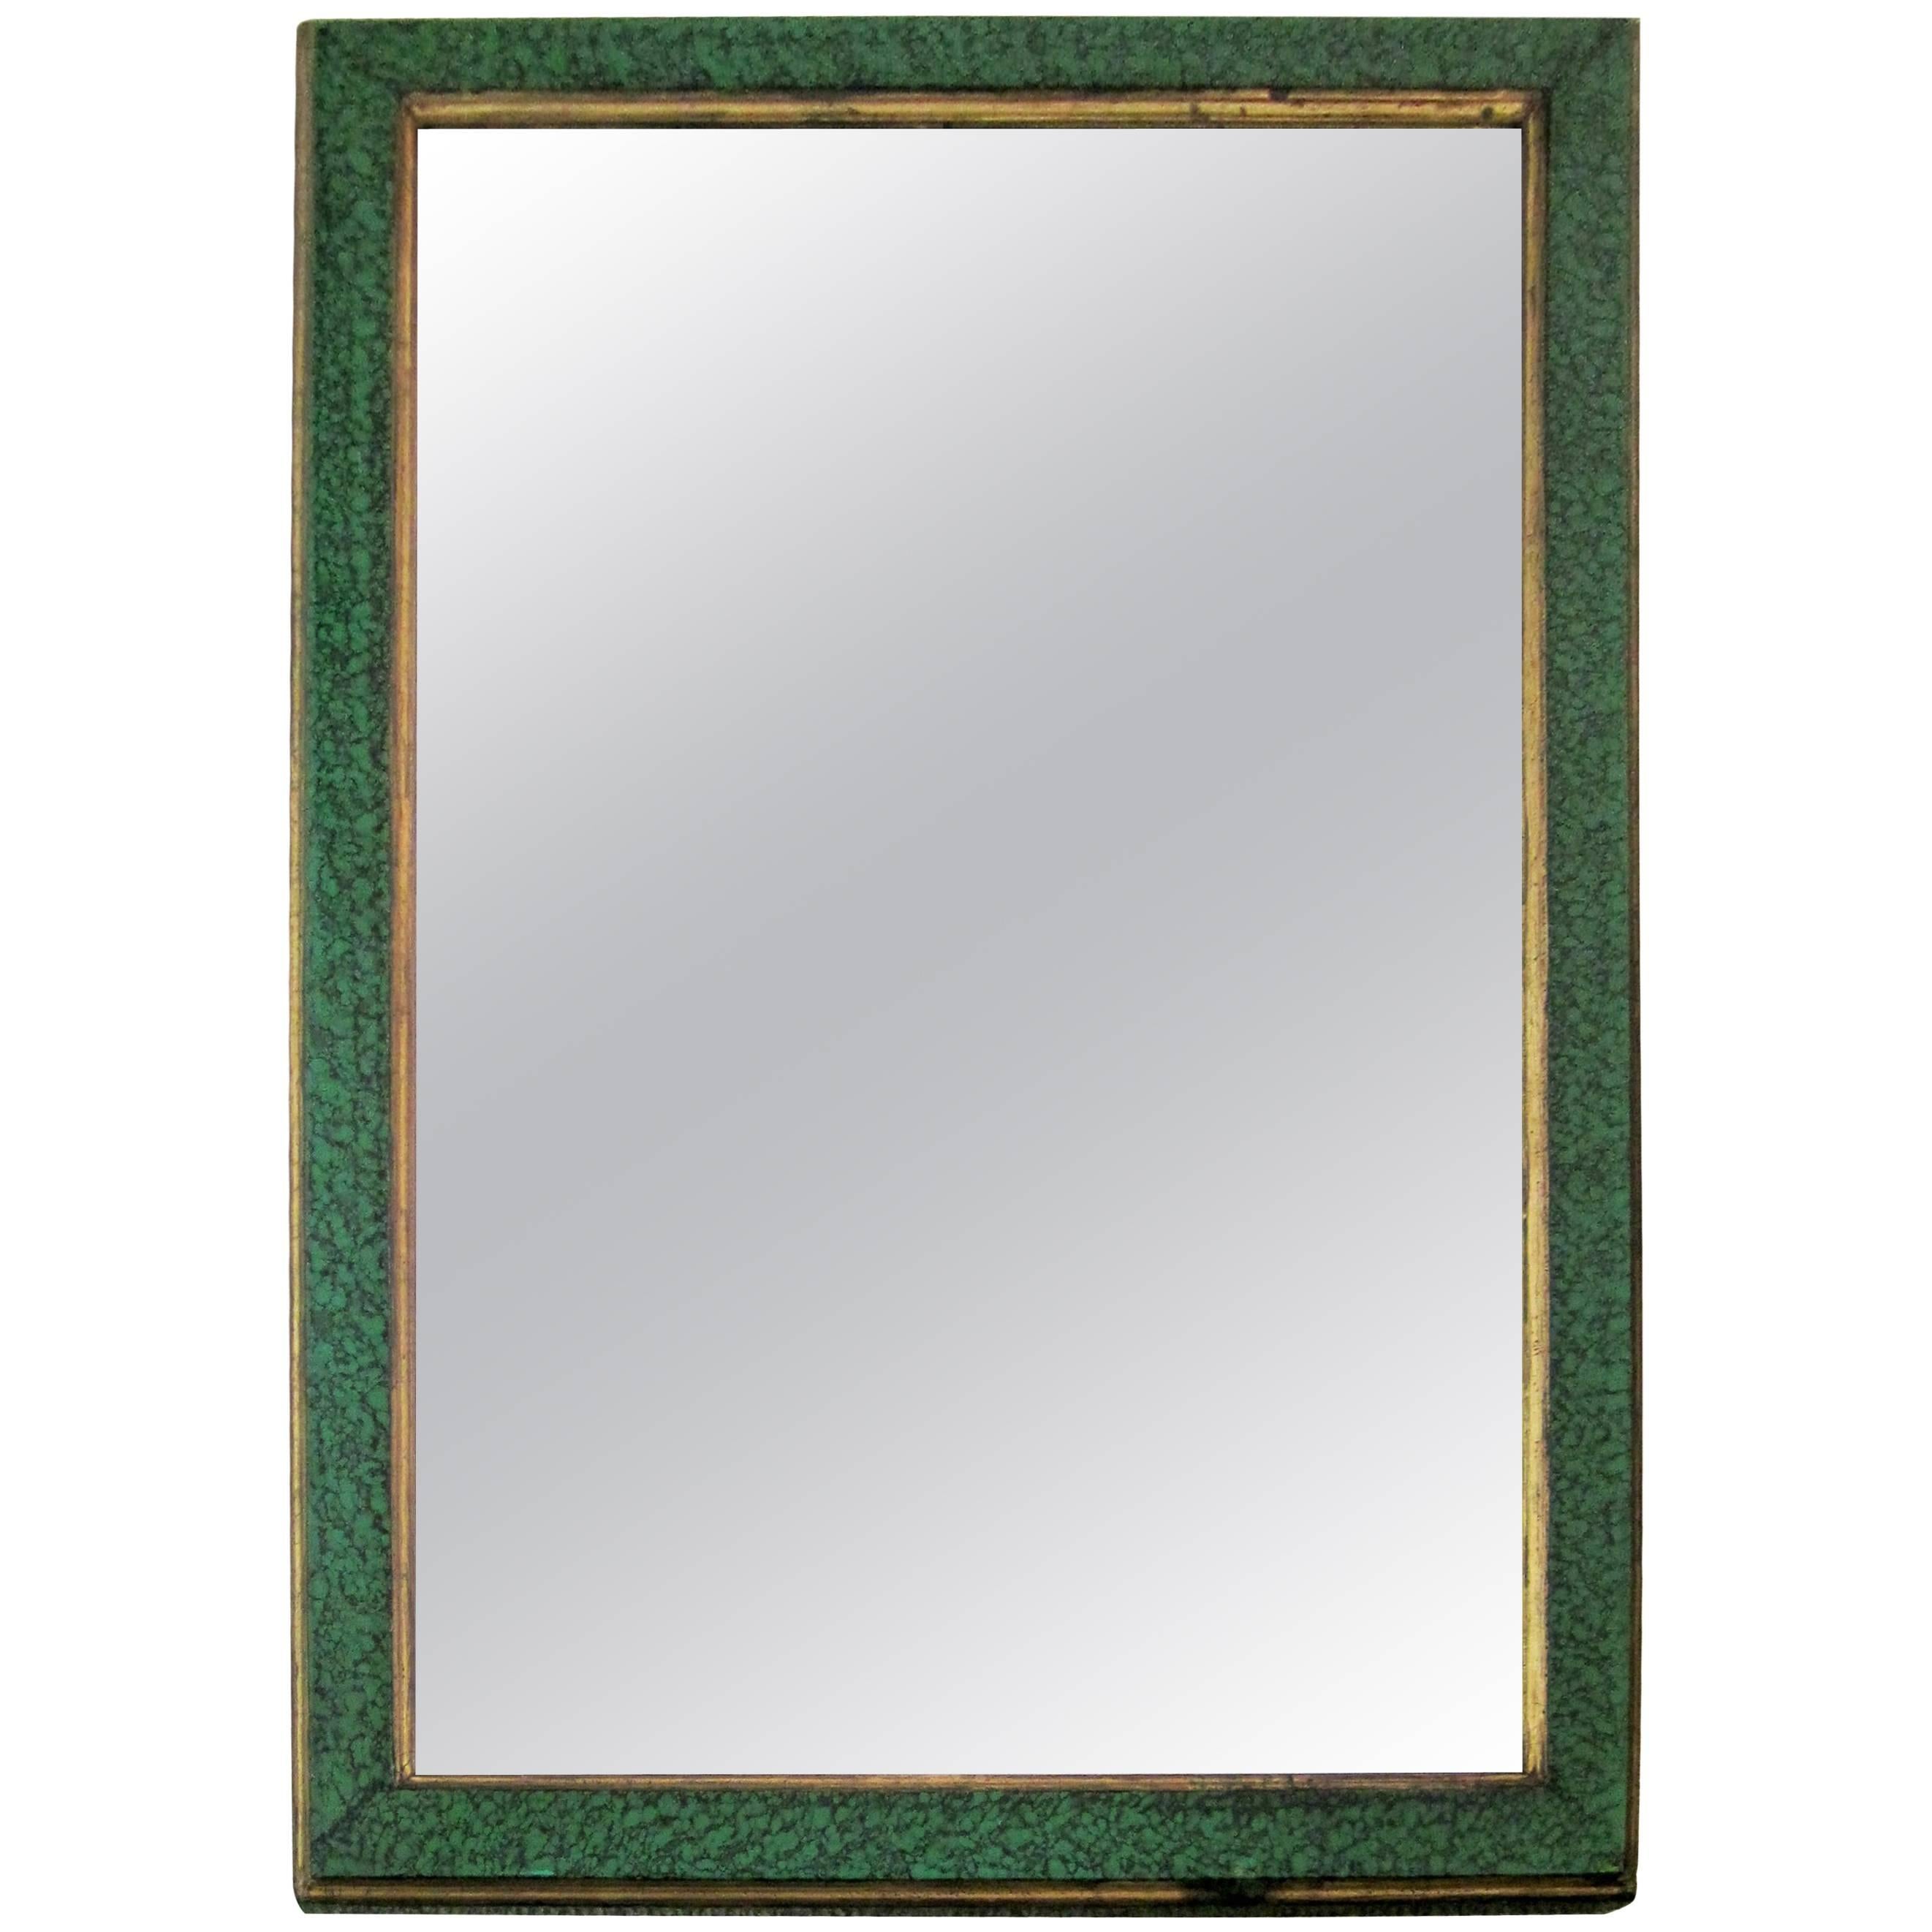 Malachite Green Lacquer and Gold Giltwood Rectangular Wall Mirror, ca. 1970s